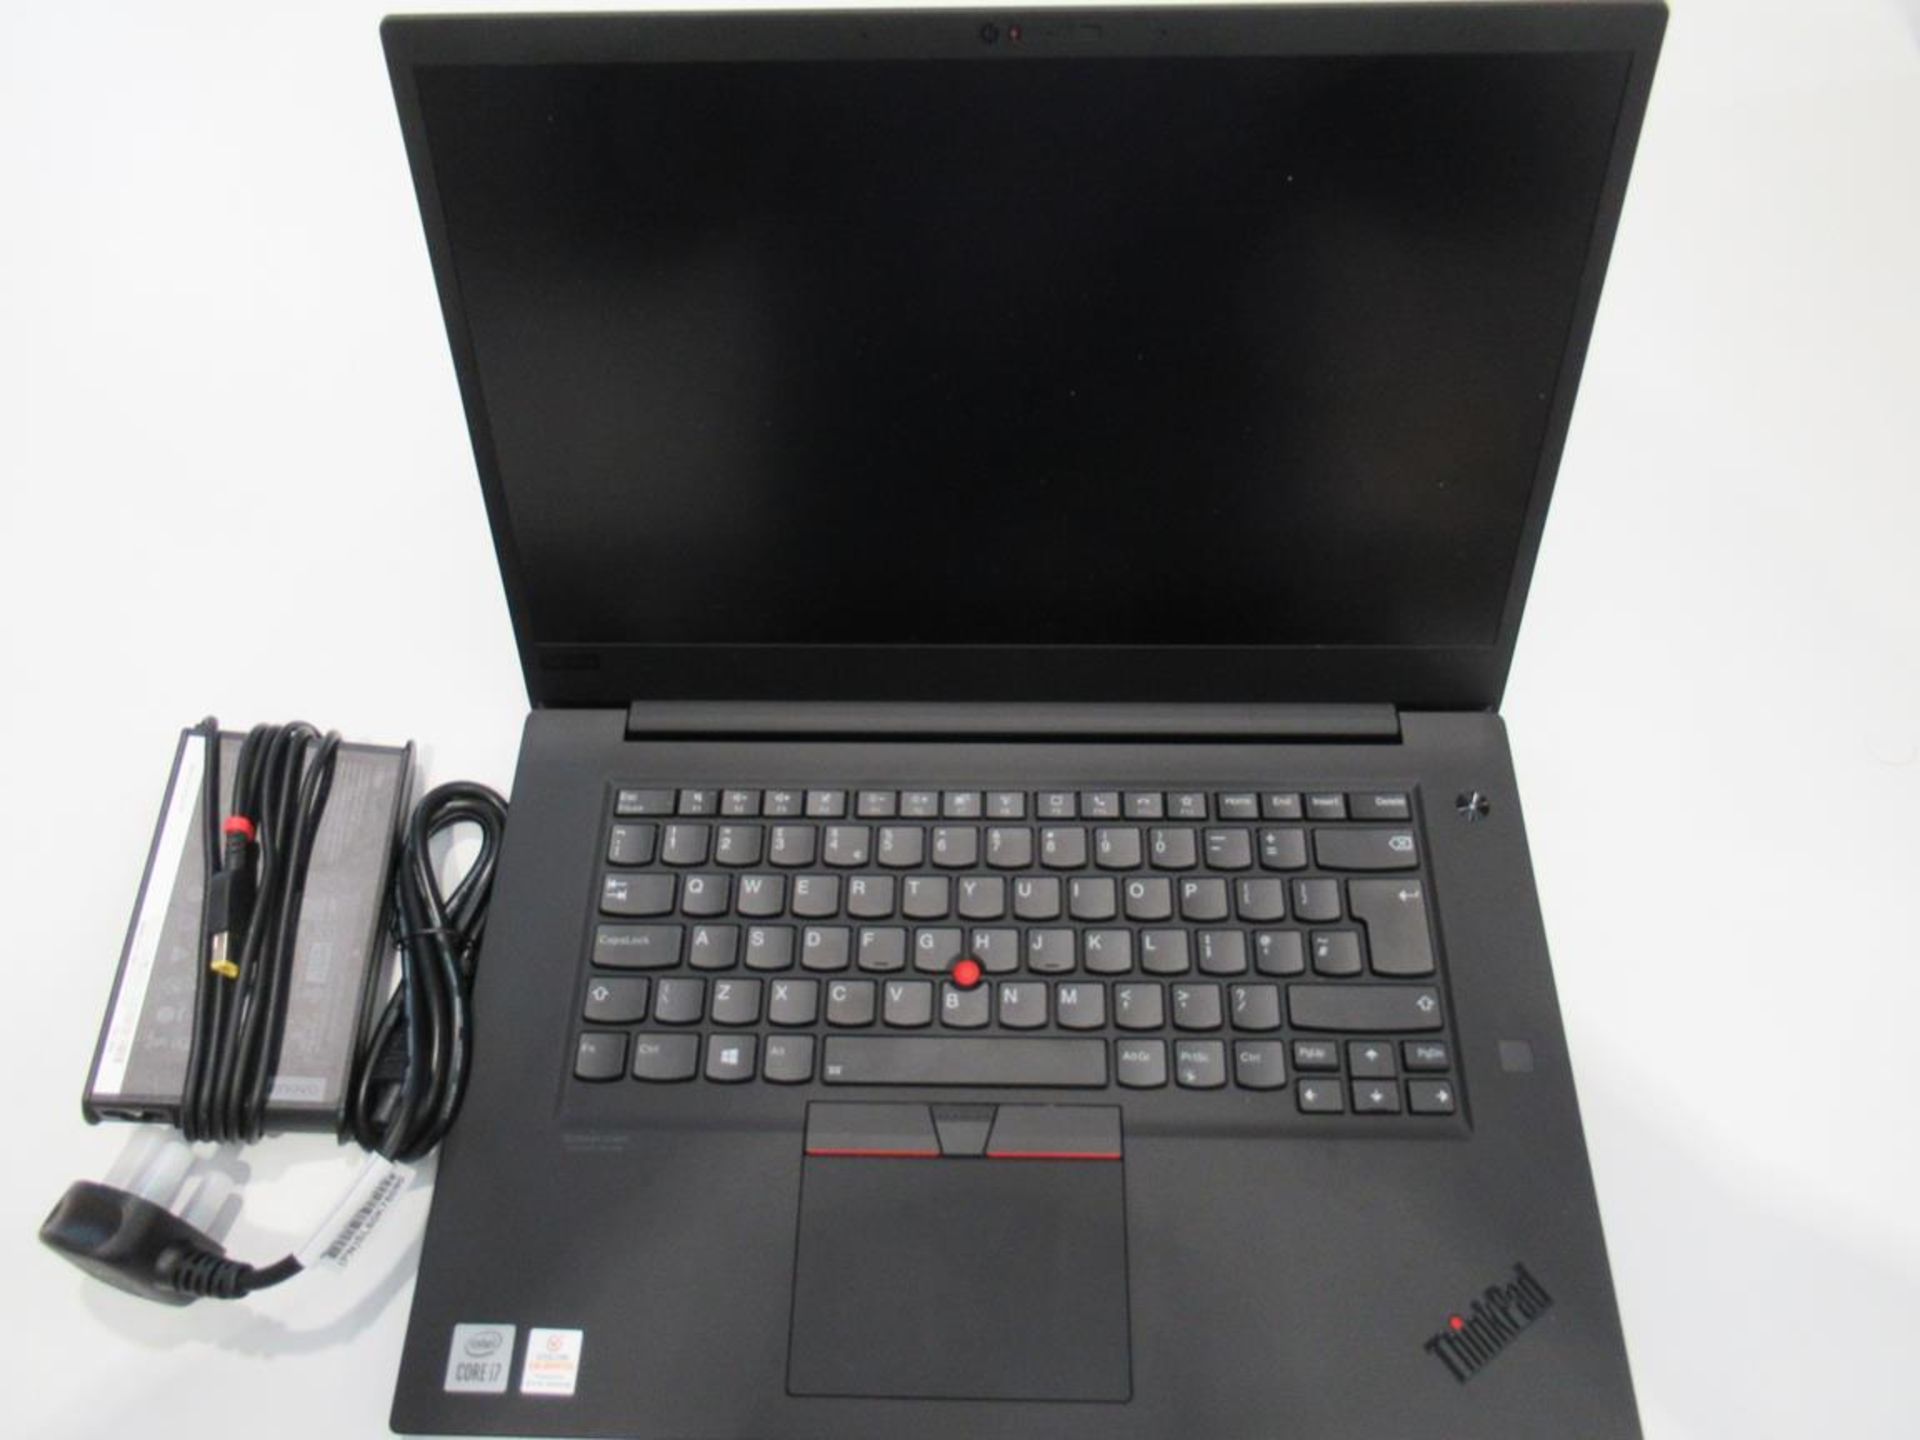 Lenovo, Thinkpad X1 Extreme Gen 3 CAD specification (boxed)